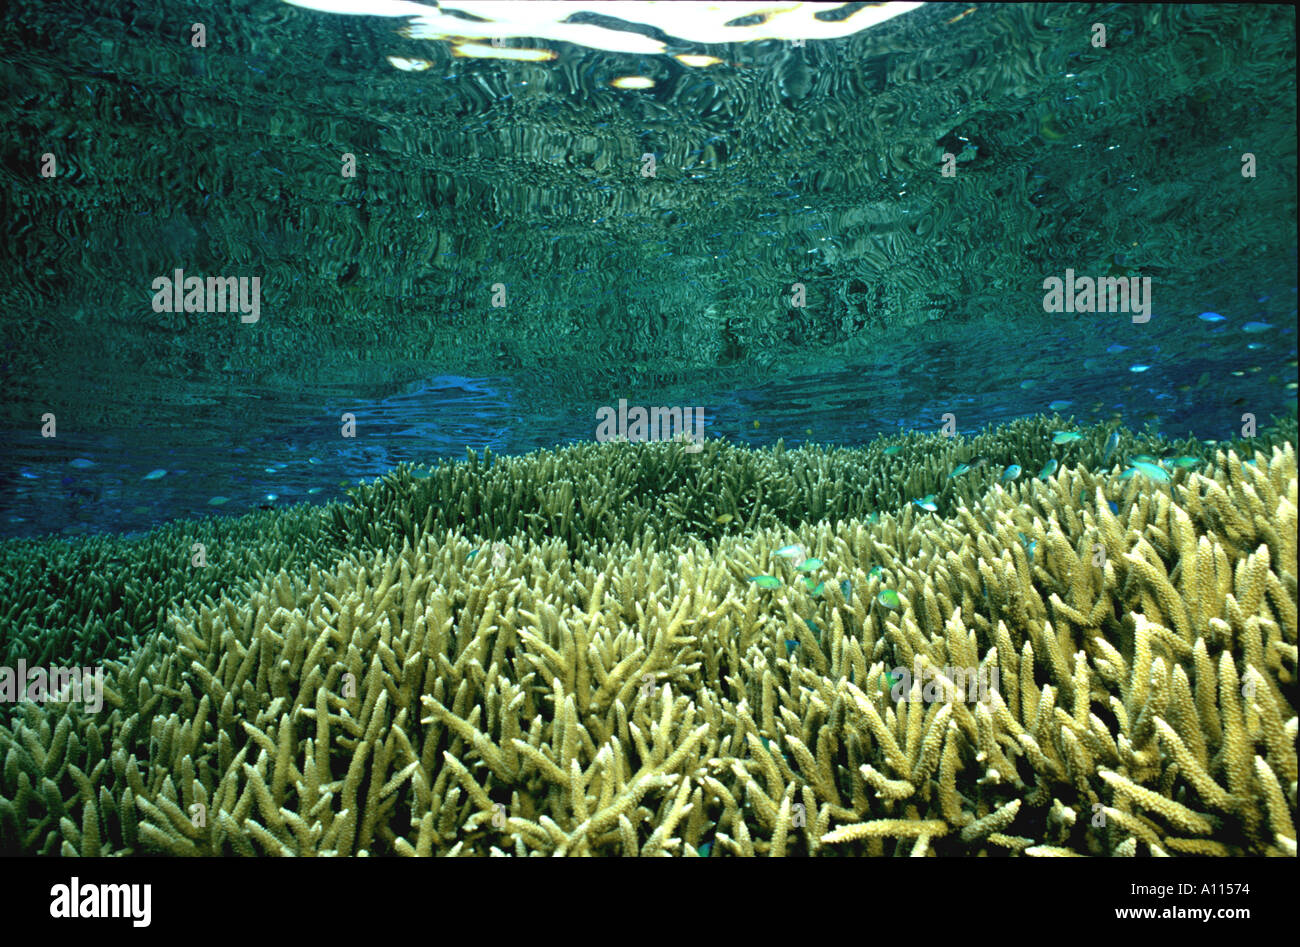 A REEFTOP COMPOSED OF STAGHORN CORALS REFLECTS AGAINST THE OCEAN SURFACE IN PAPUA NEW GUINEA Stock Photo